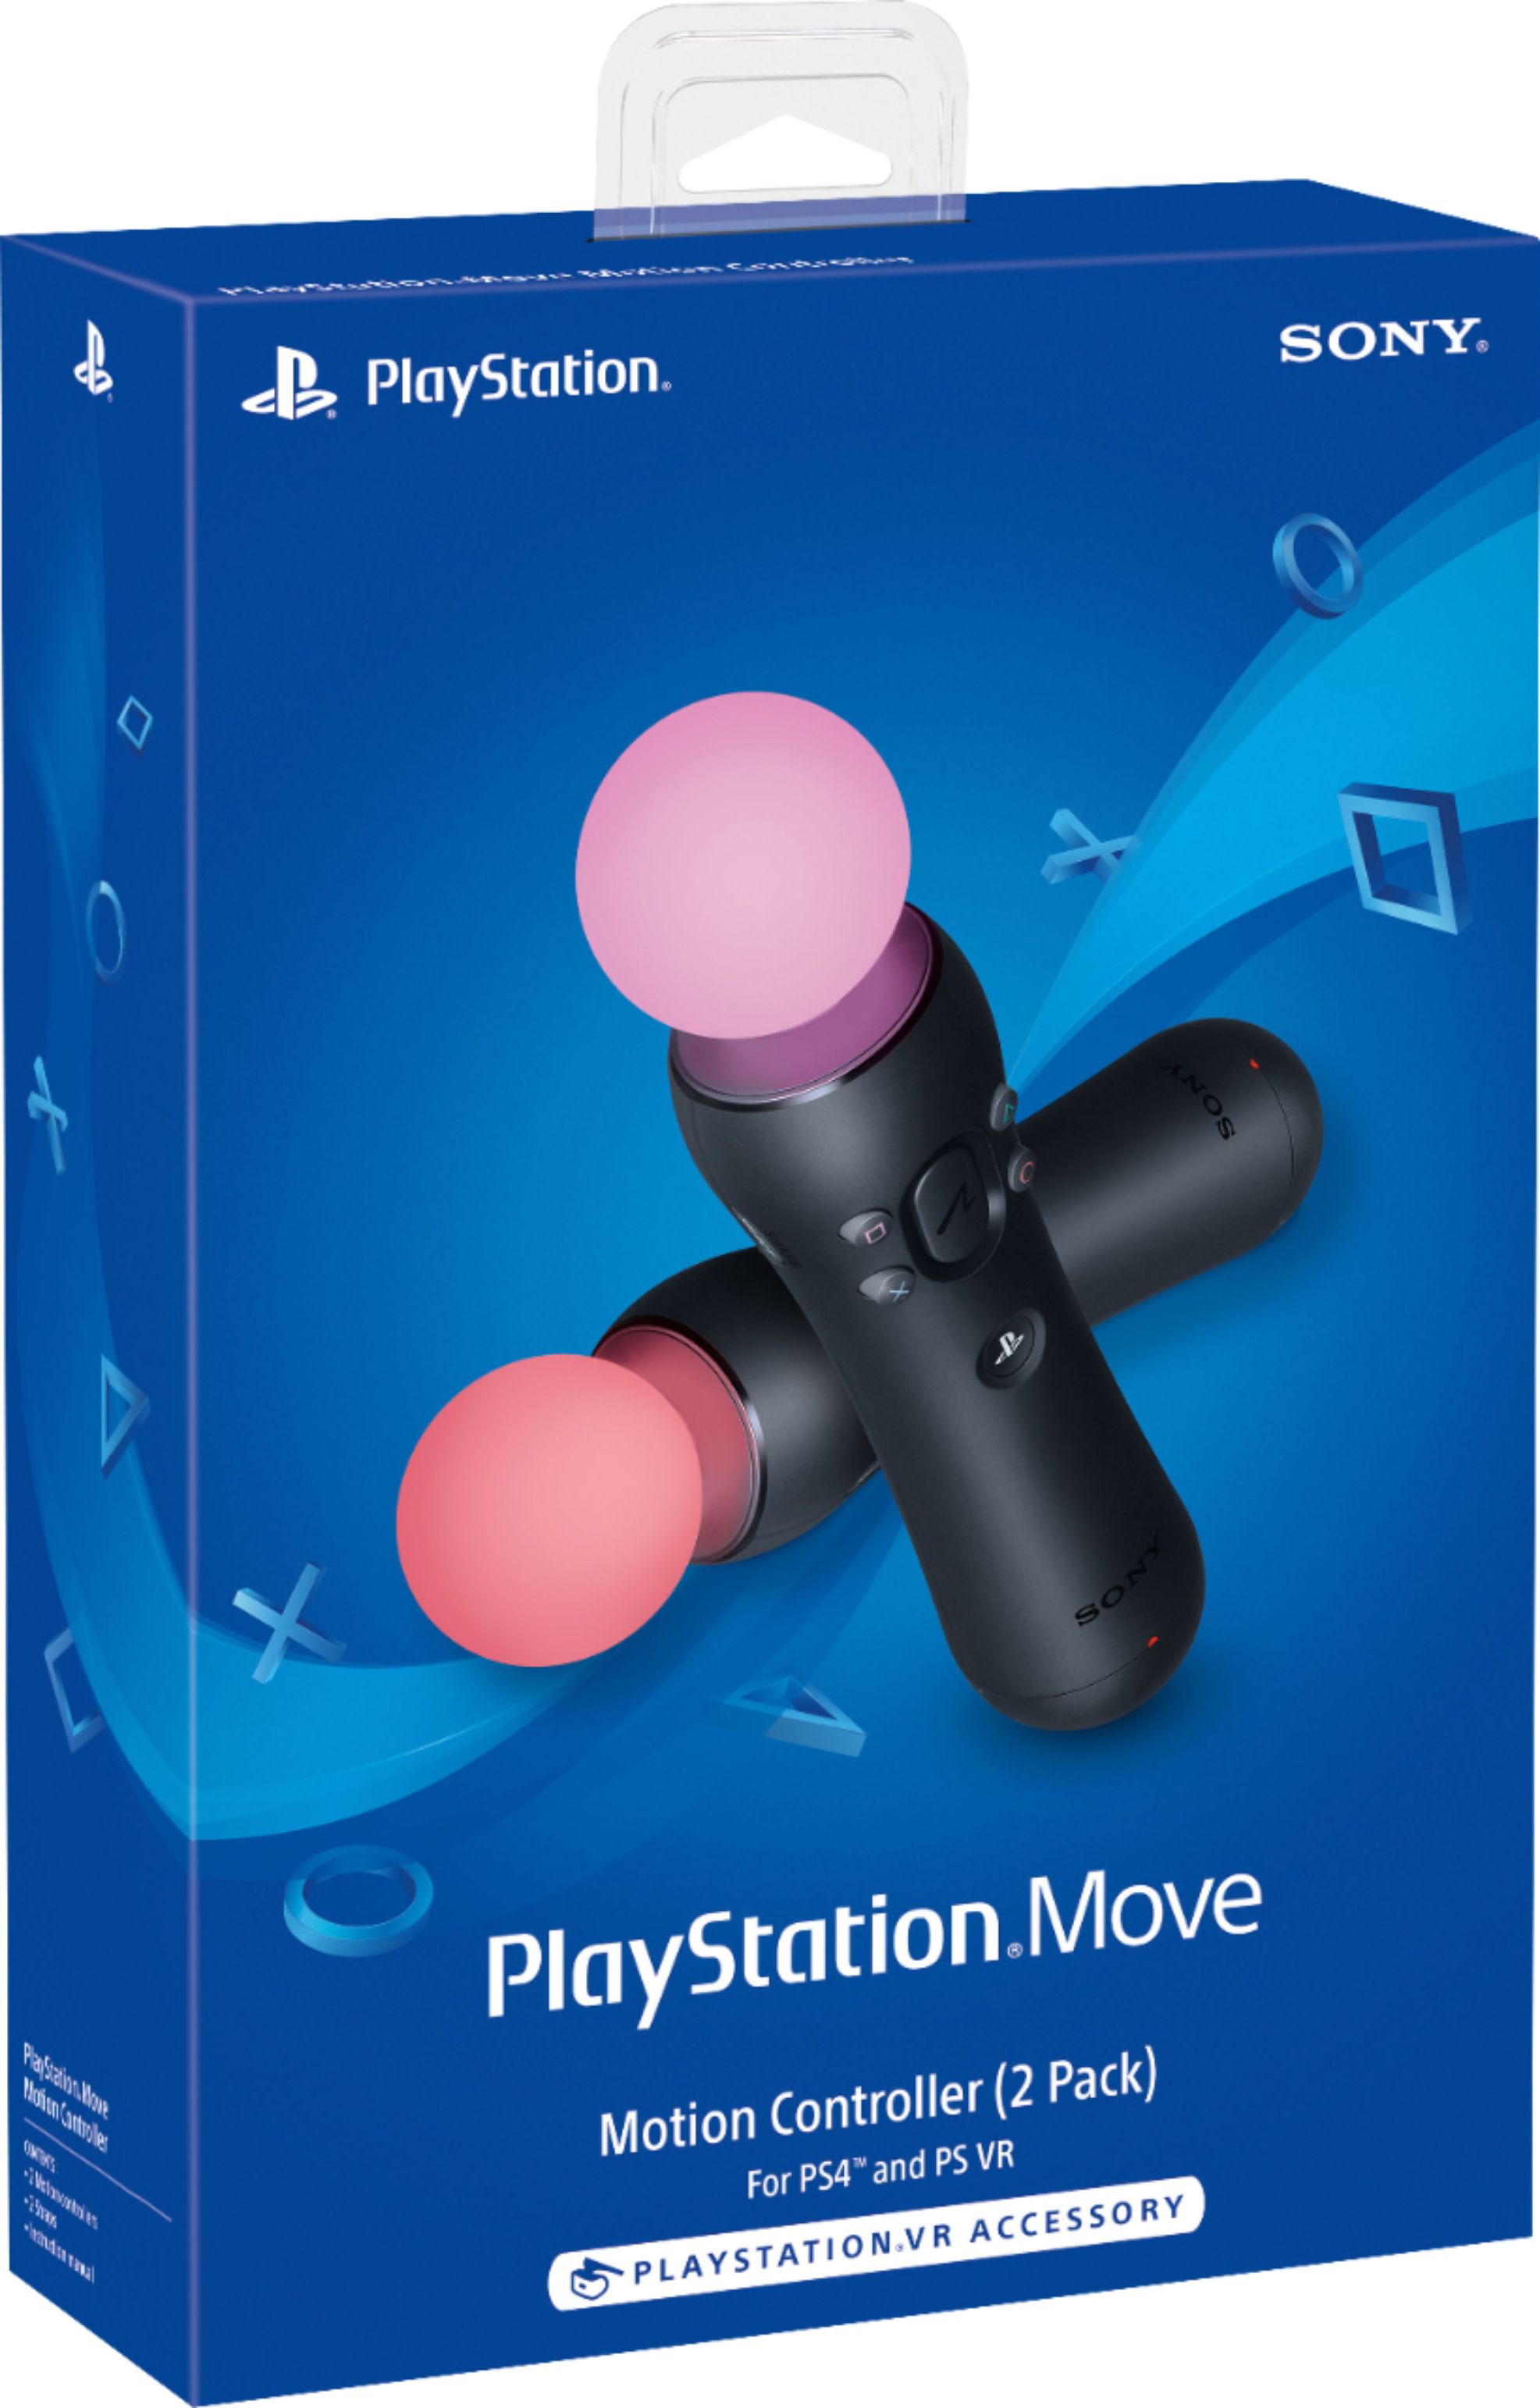 can you use ps3 motion controller on ps4